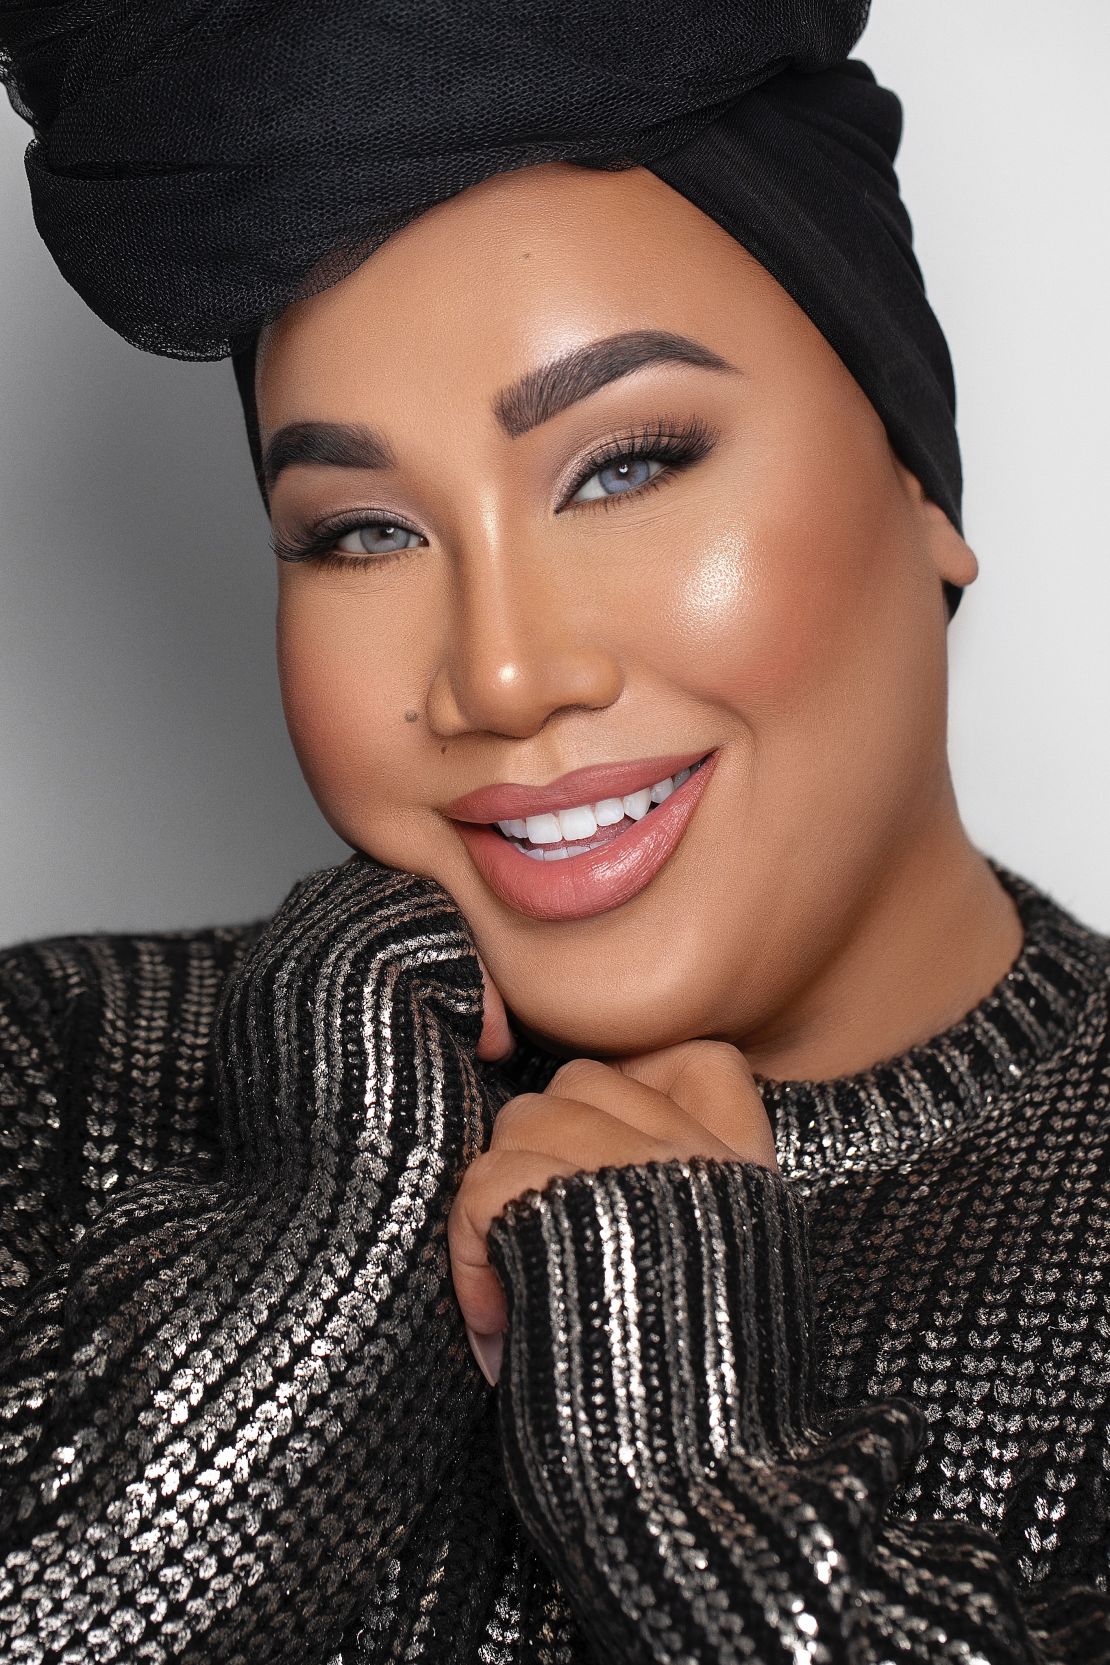 Patrick Starrr: "Makeup, I believe, is truly 'one size fits all'"